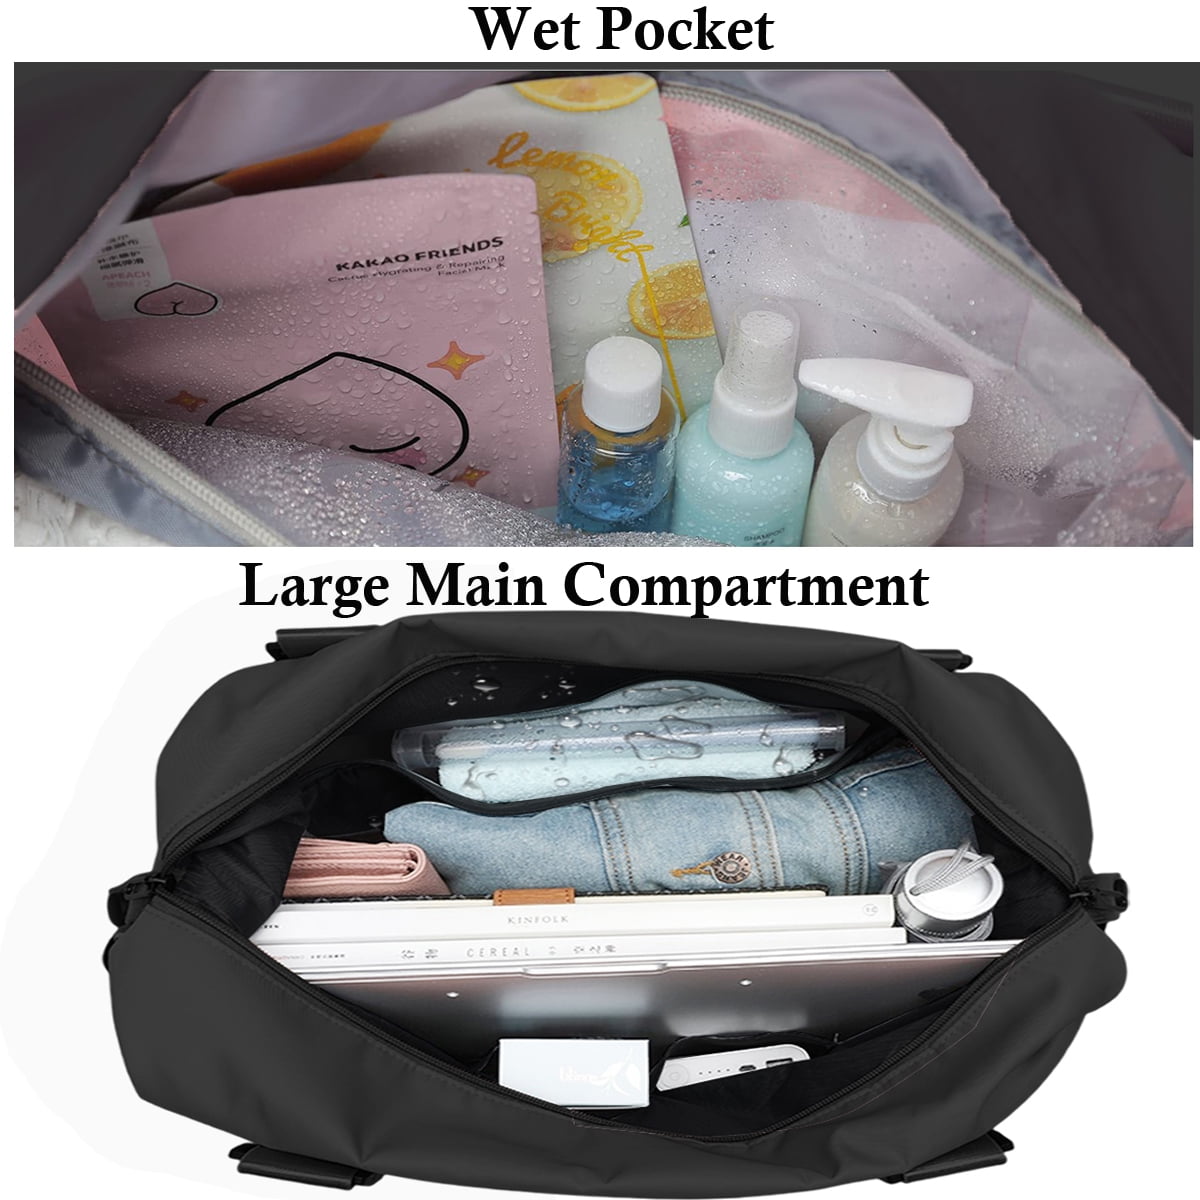 24 inch Weekender Bags for Women,Travel Duffel Bags Carry on Gym Bag, Overnight Bag with Wet Dry Pocket/Front Phone Pocket/Trolley Sleeve Pocket for